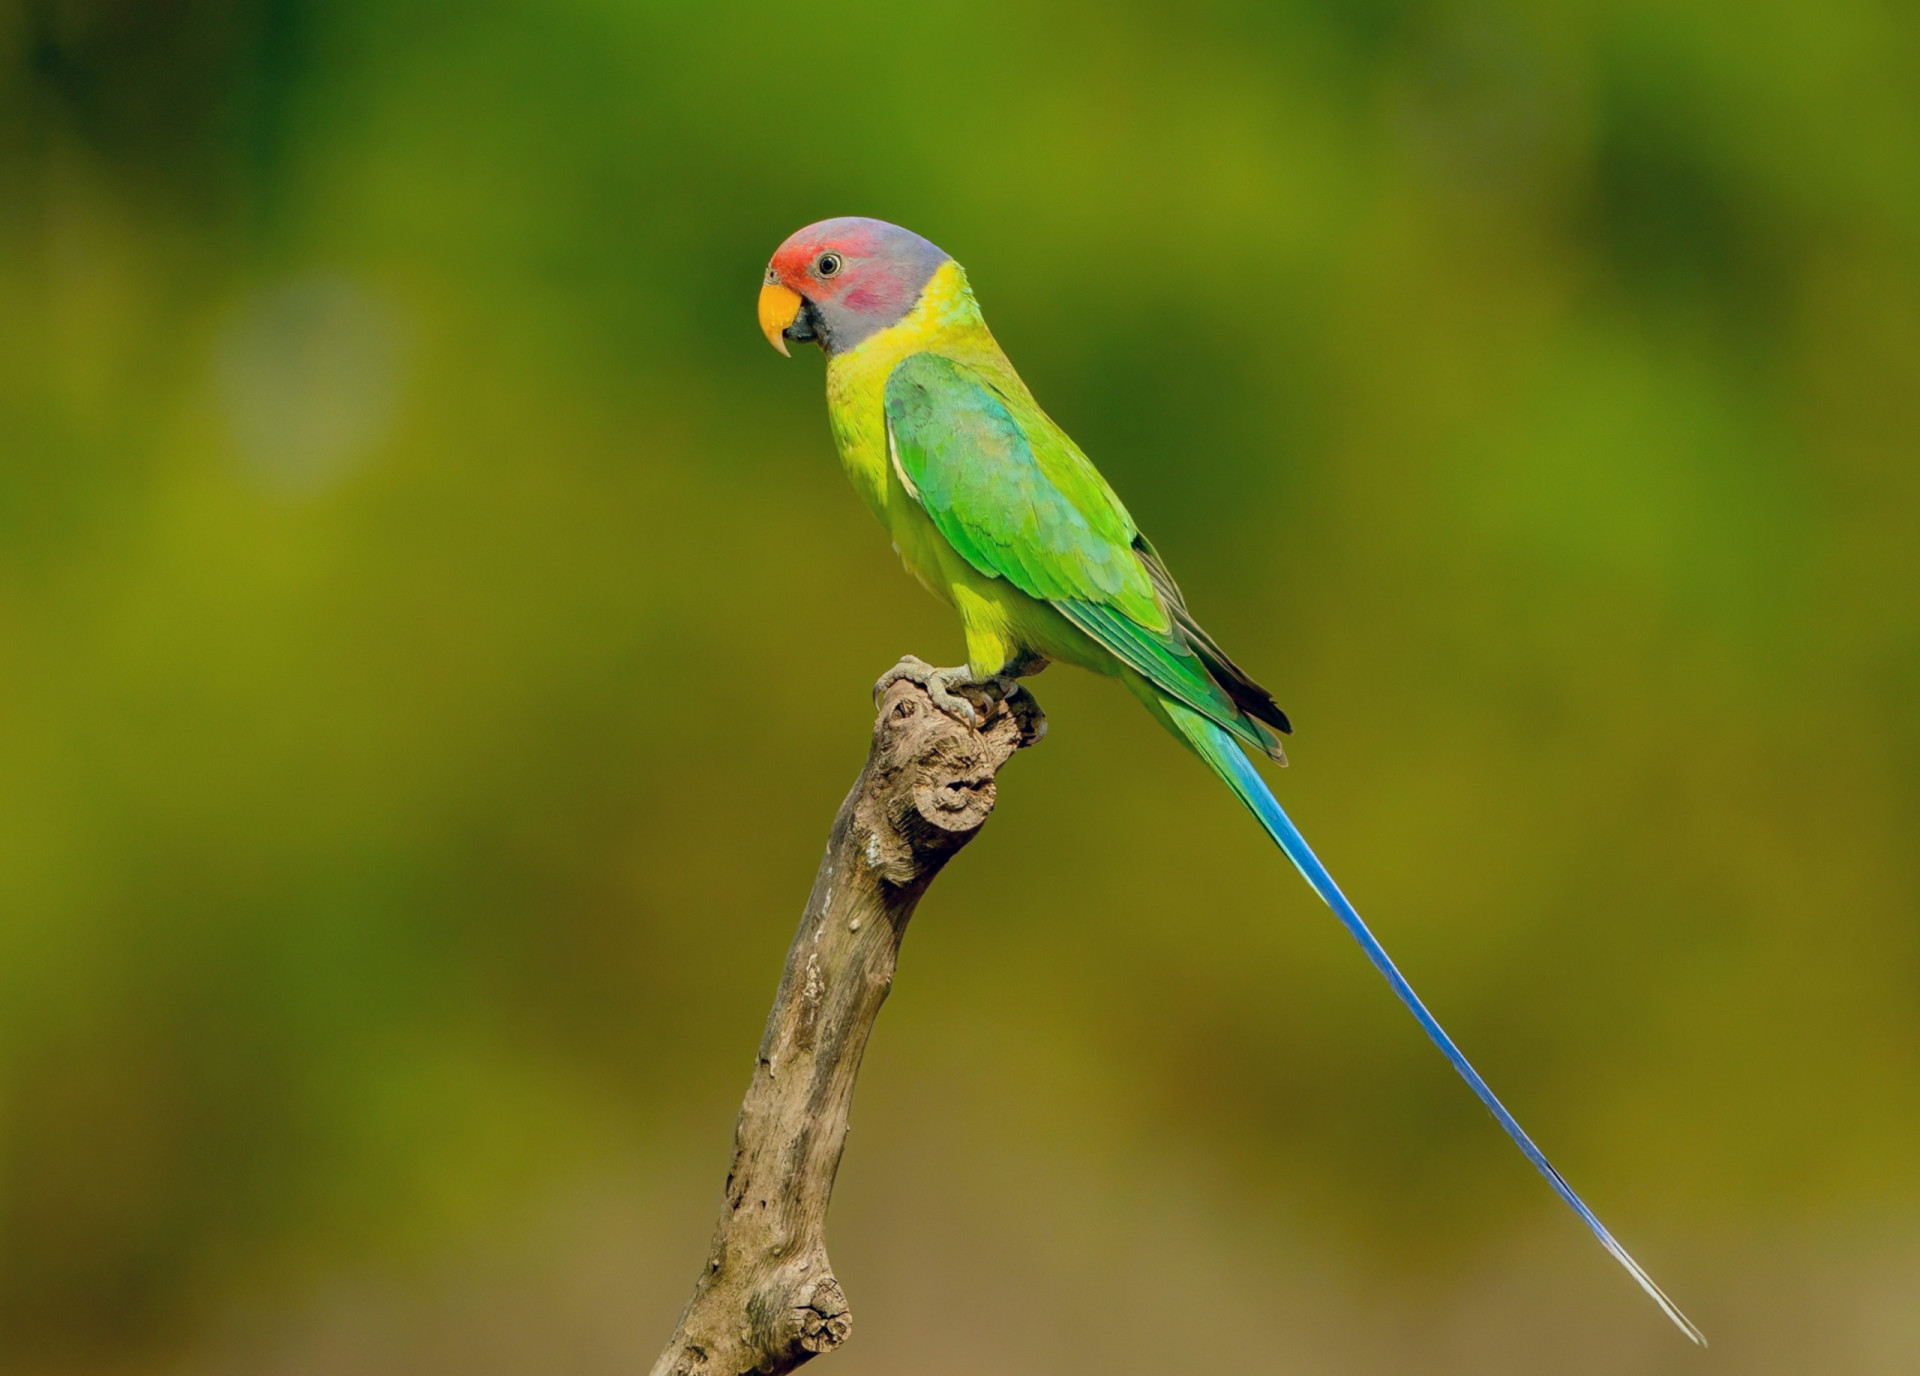 <p>One of the West Baratang Group of the Andaman Islands, Parrot Island is, as the name suggests, famous for its colorful birdlife. Tourists flock to this uninhabited island to hear the evening calls of thousands of parrots.</p><p><a href="https://www.msn.com/en-nz/community/channel/vid-7xx8mnucu55yw63we9va2gwr7uihbxwc68fxqp25x6tg4ftibpra?cvid=94631541bc0f4f89bfd59158d696ad7e">Follow us and access great exclusive content every day</a></p>